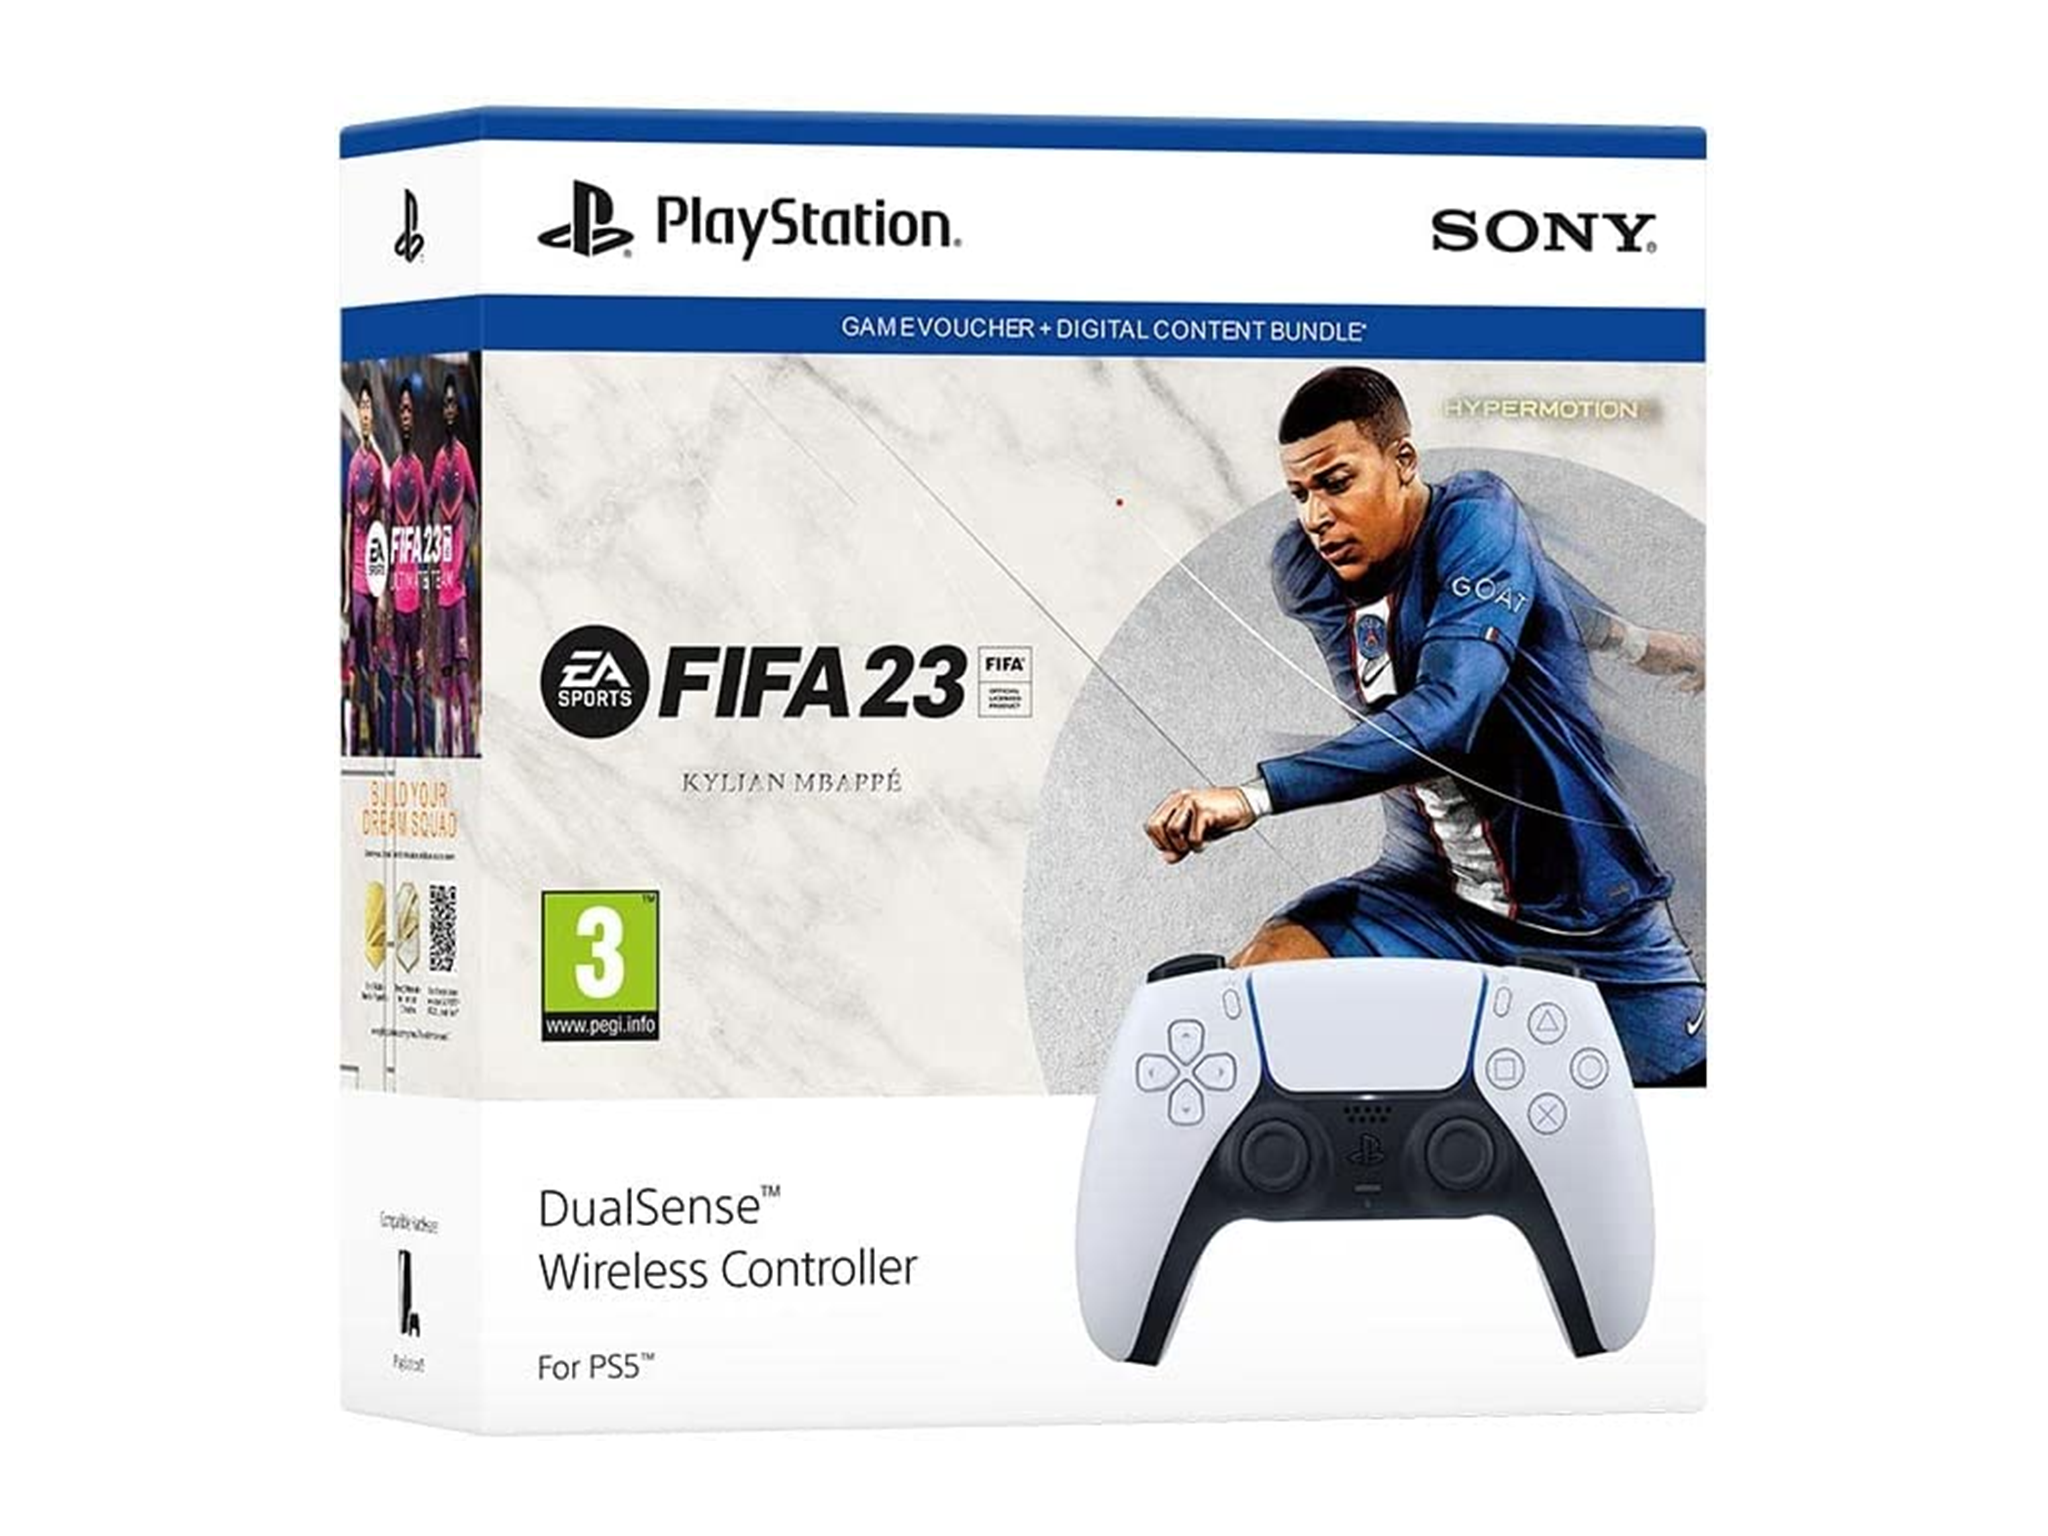 FIFA 23 bundle deal: Save over 38% on the game and a PS5 dualsense  controller